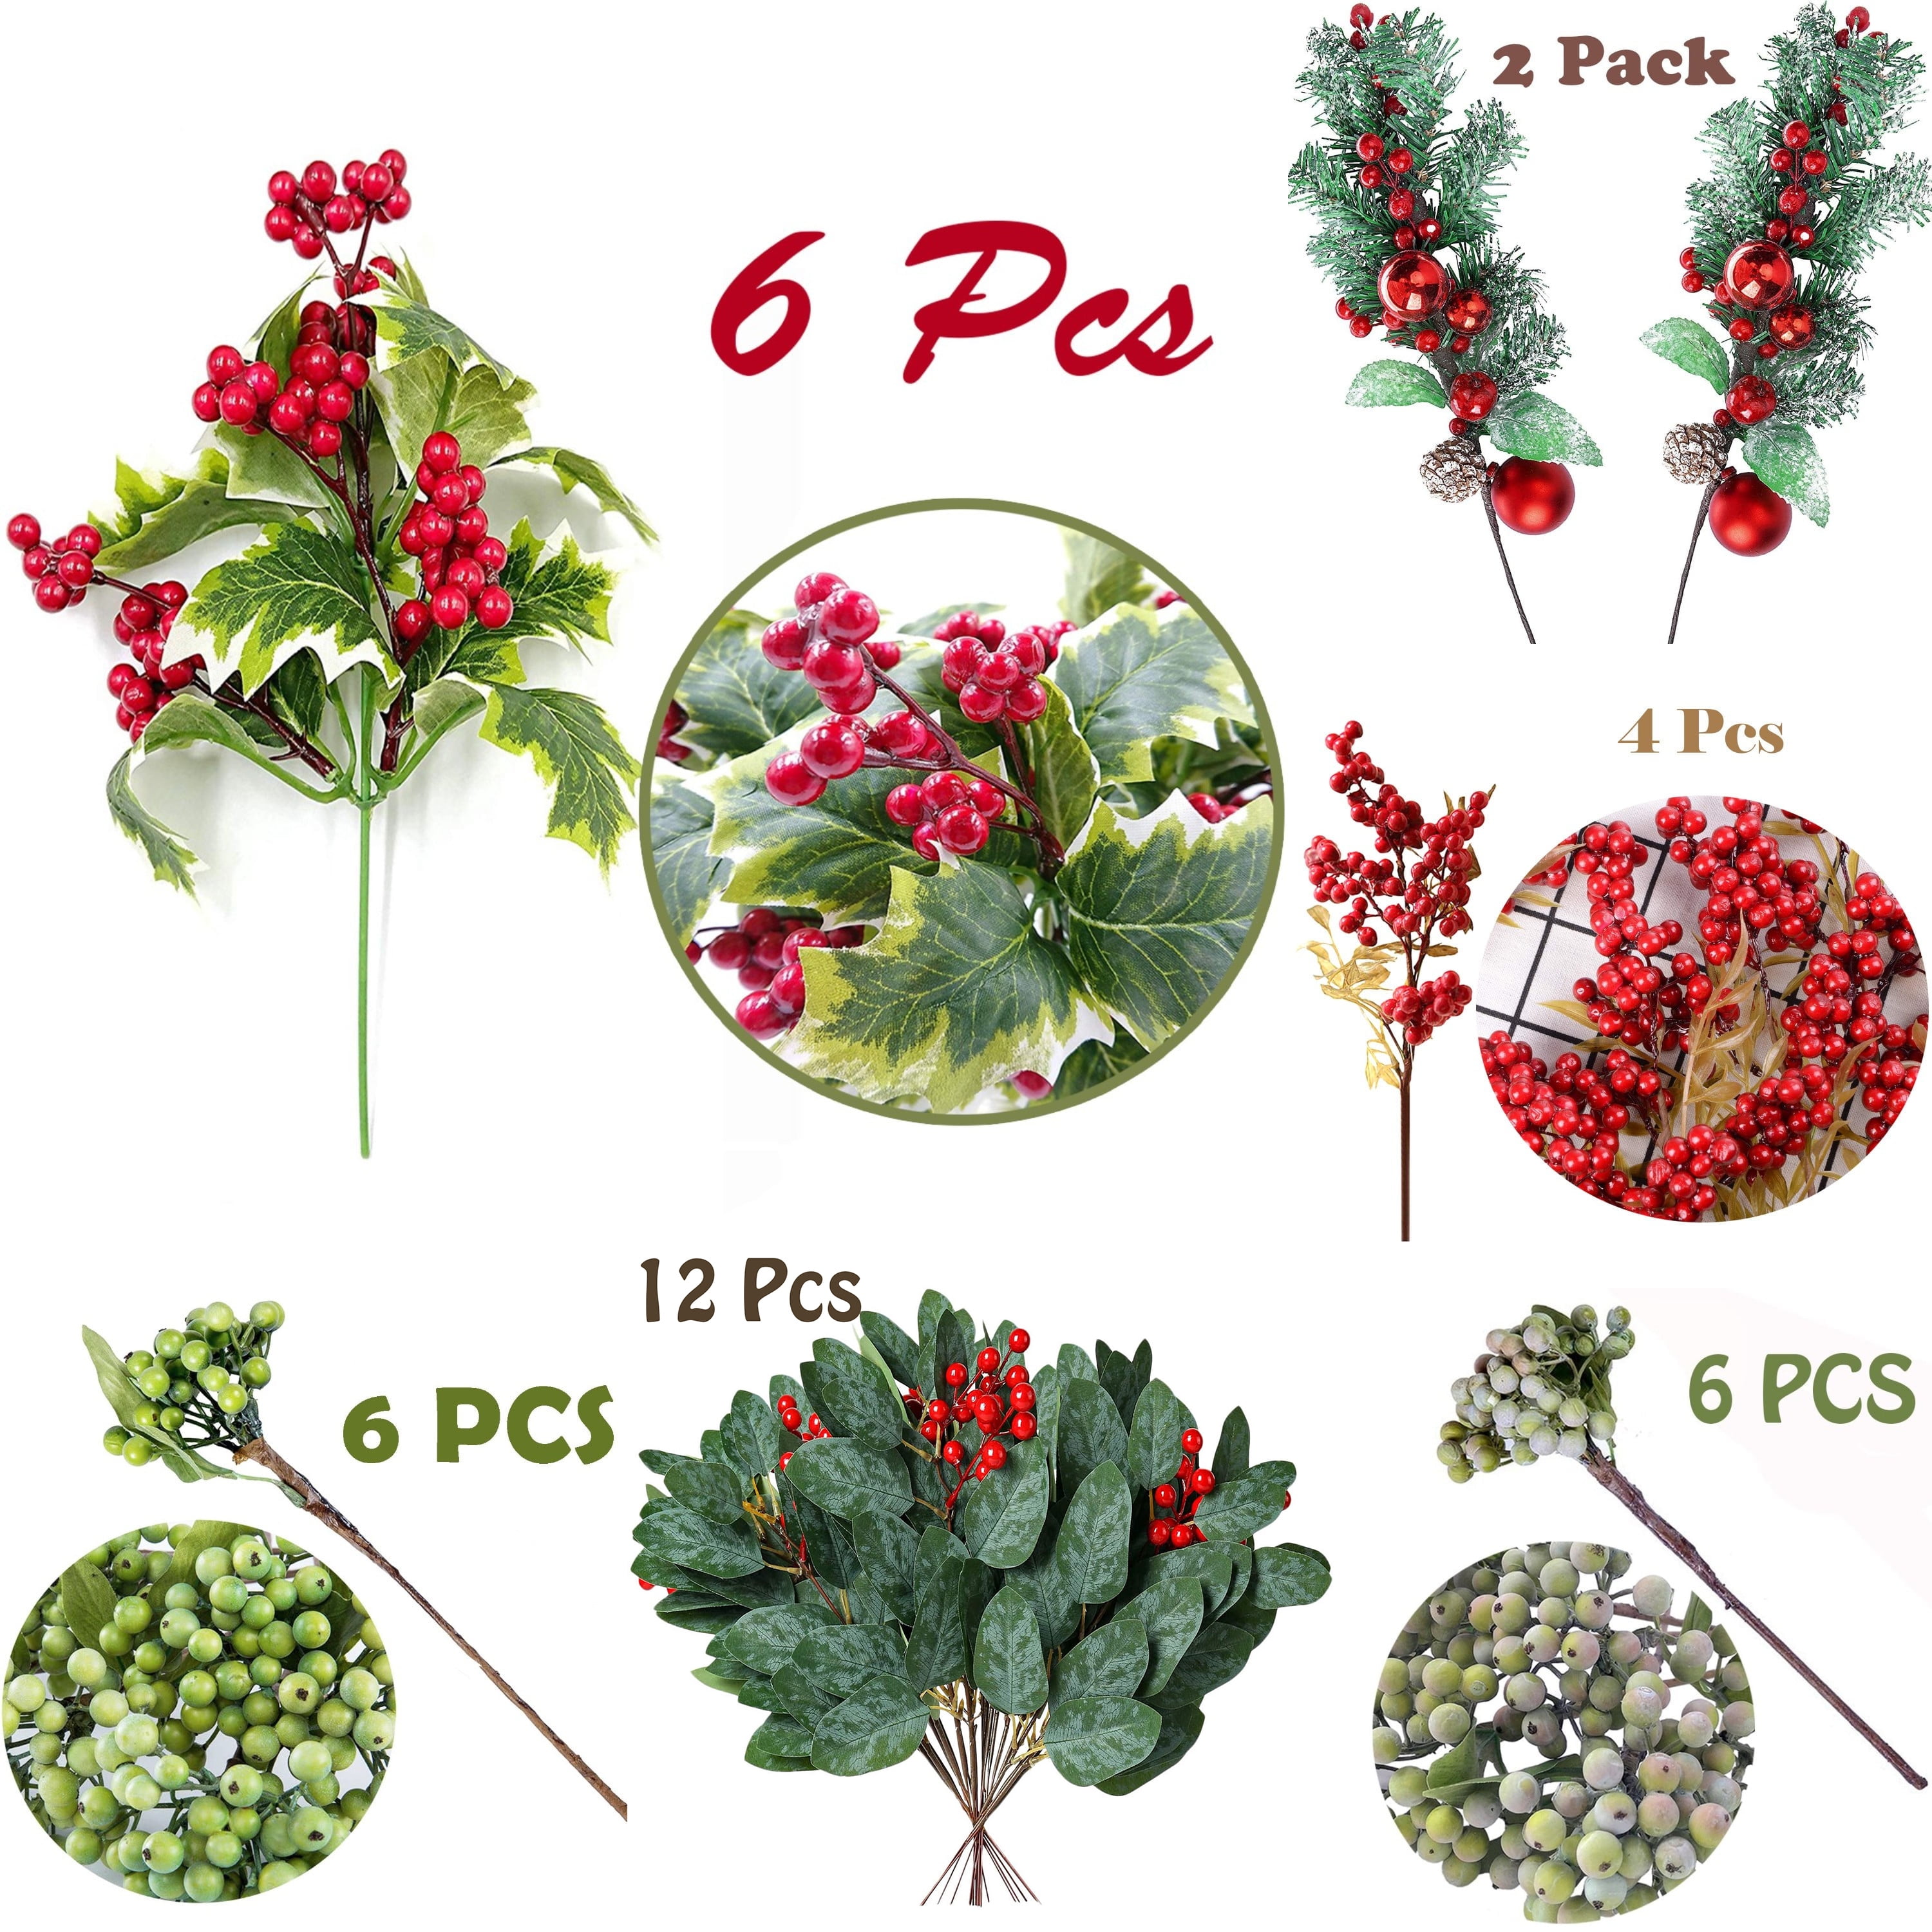 YHDSN 12 Pcs Artificial Christmas Red Berry Picks Holly Berries Flower Stem  Needles Branches Fake Greenery Floral Picks Arrangements for Xmas Wreath  Crafts Party Festive Home Decor 